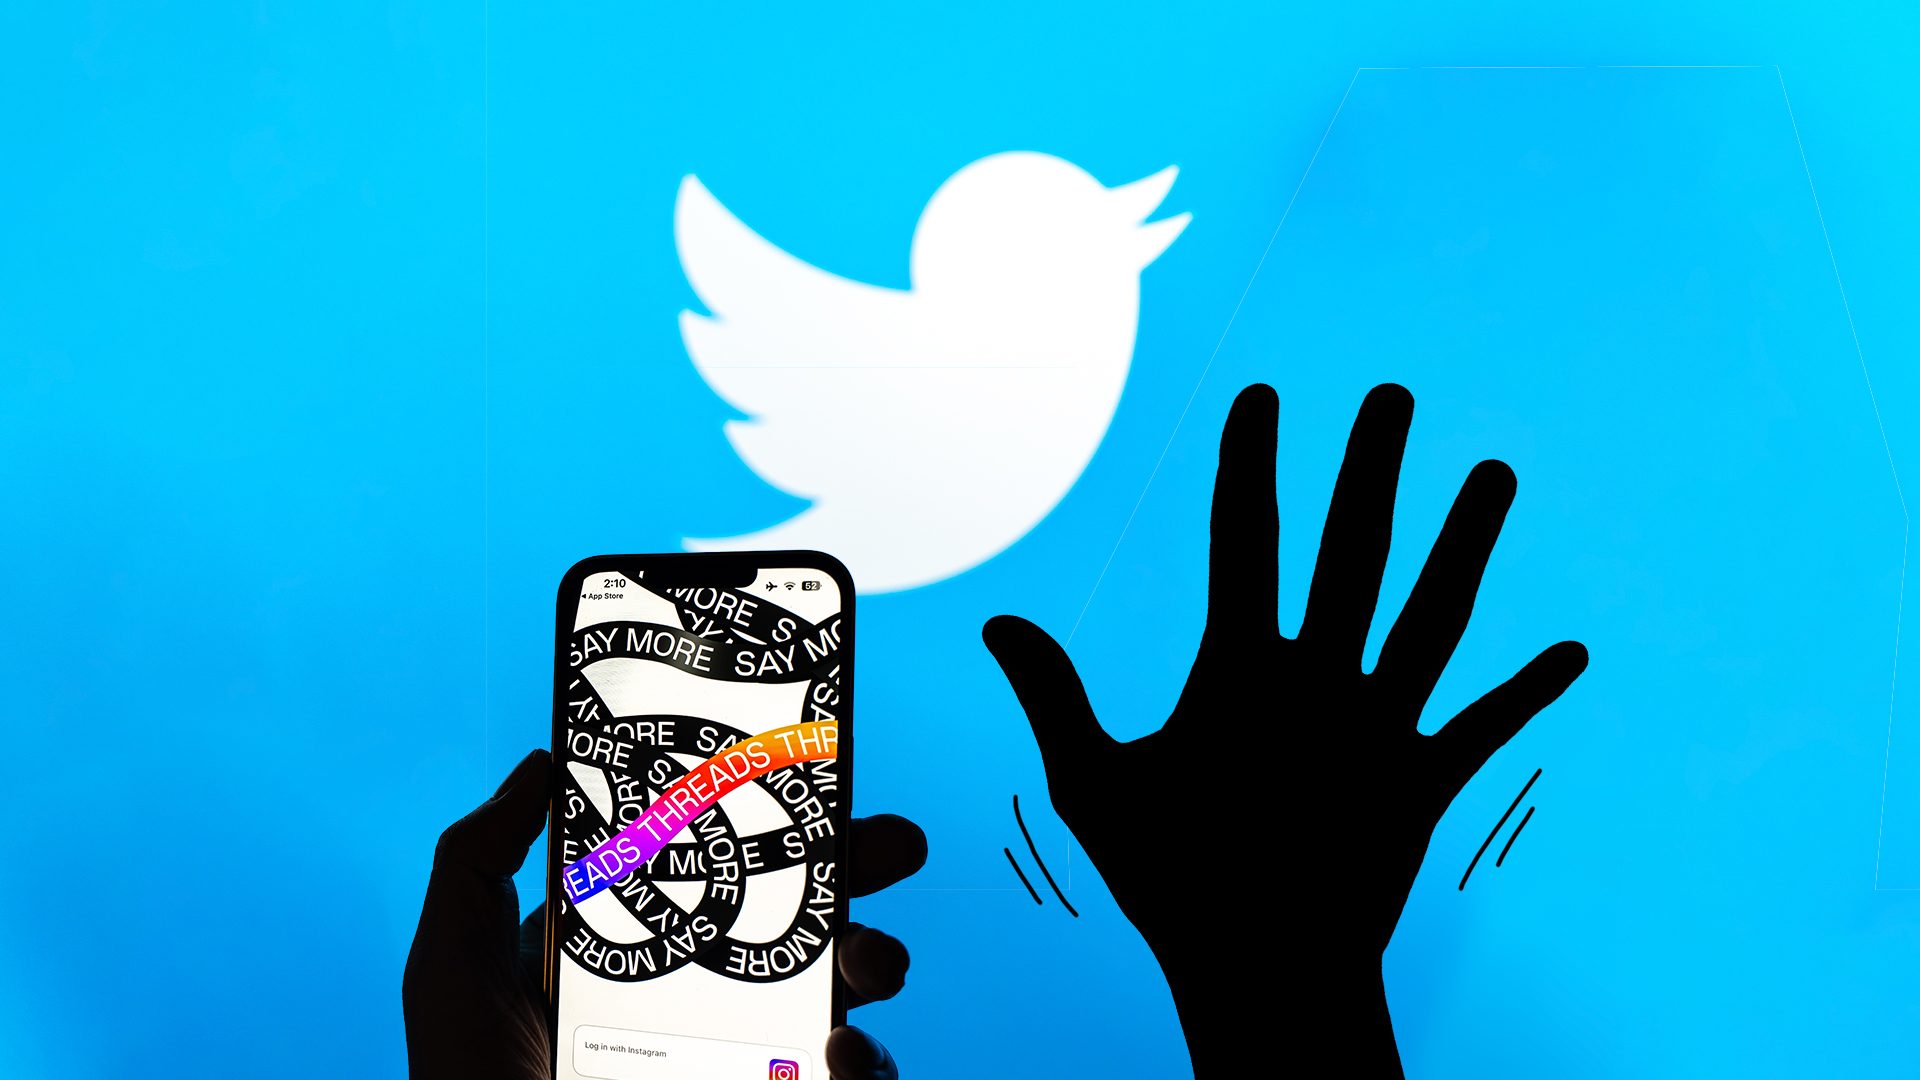 ‘Bye Twitter?’ Threads receives mixed reactions from netizens